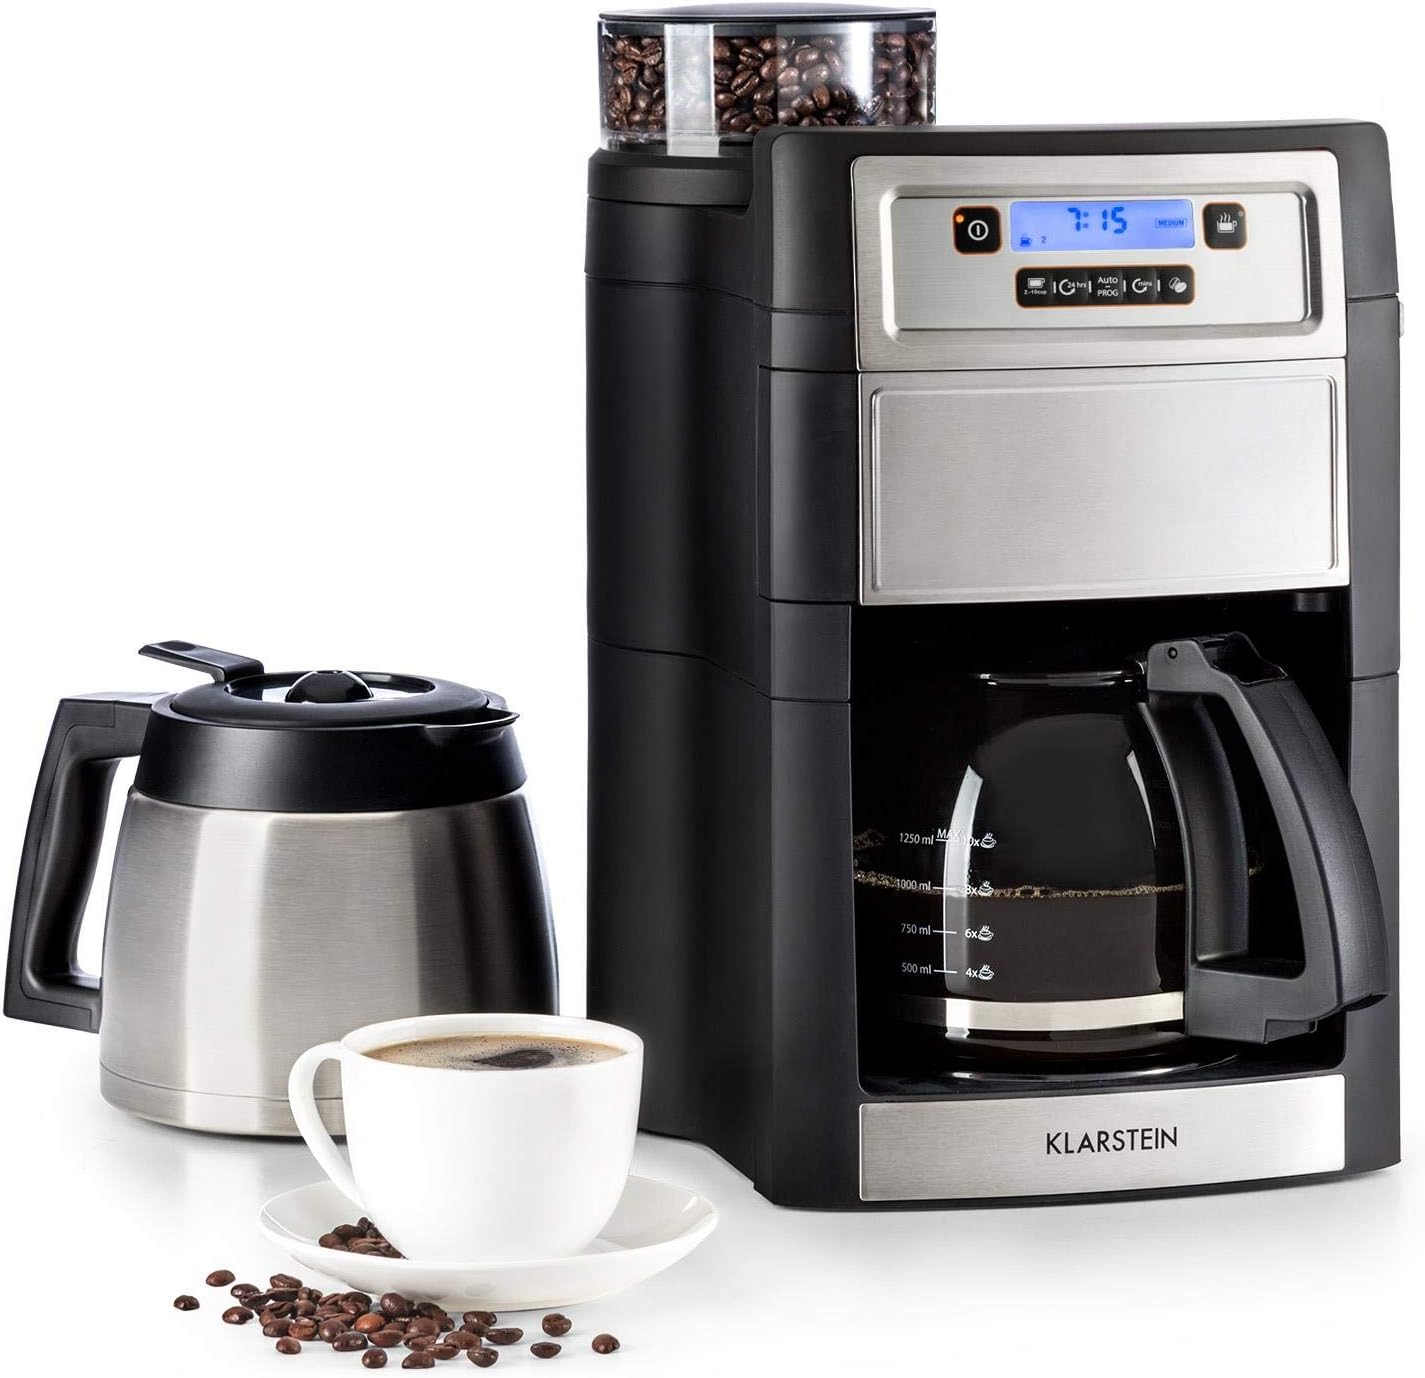 Klarstein Aromatica II Duo Coffee Machine w/Cone Gear Grinder - Filter Coffee Machine, 1000W, 1.25L Jug, 1.25L Thermos, Timer, Permanent Activated Carbon Filter, Silver